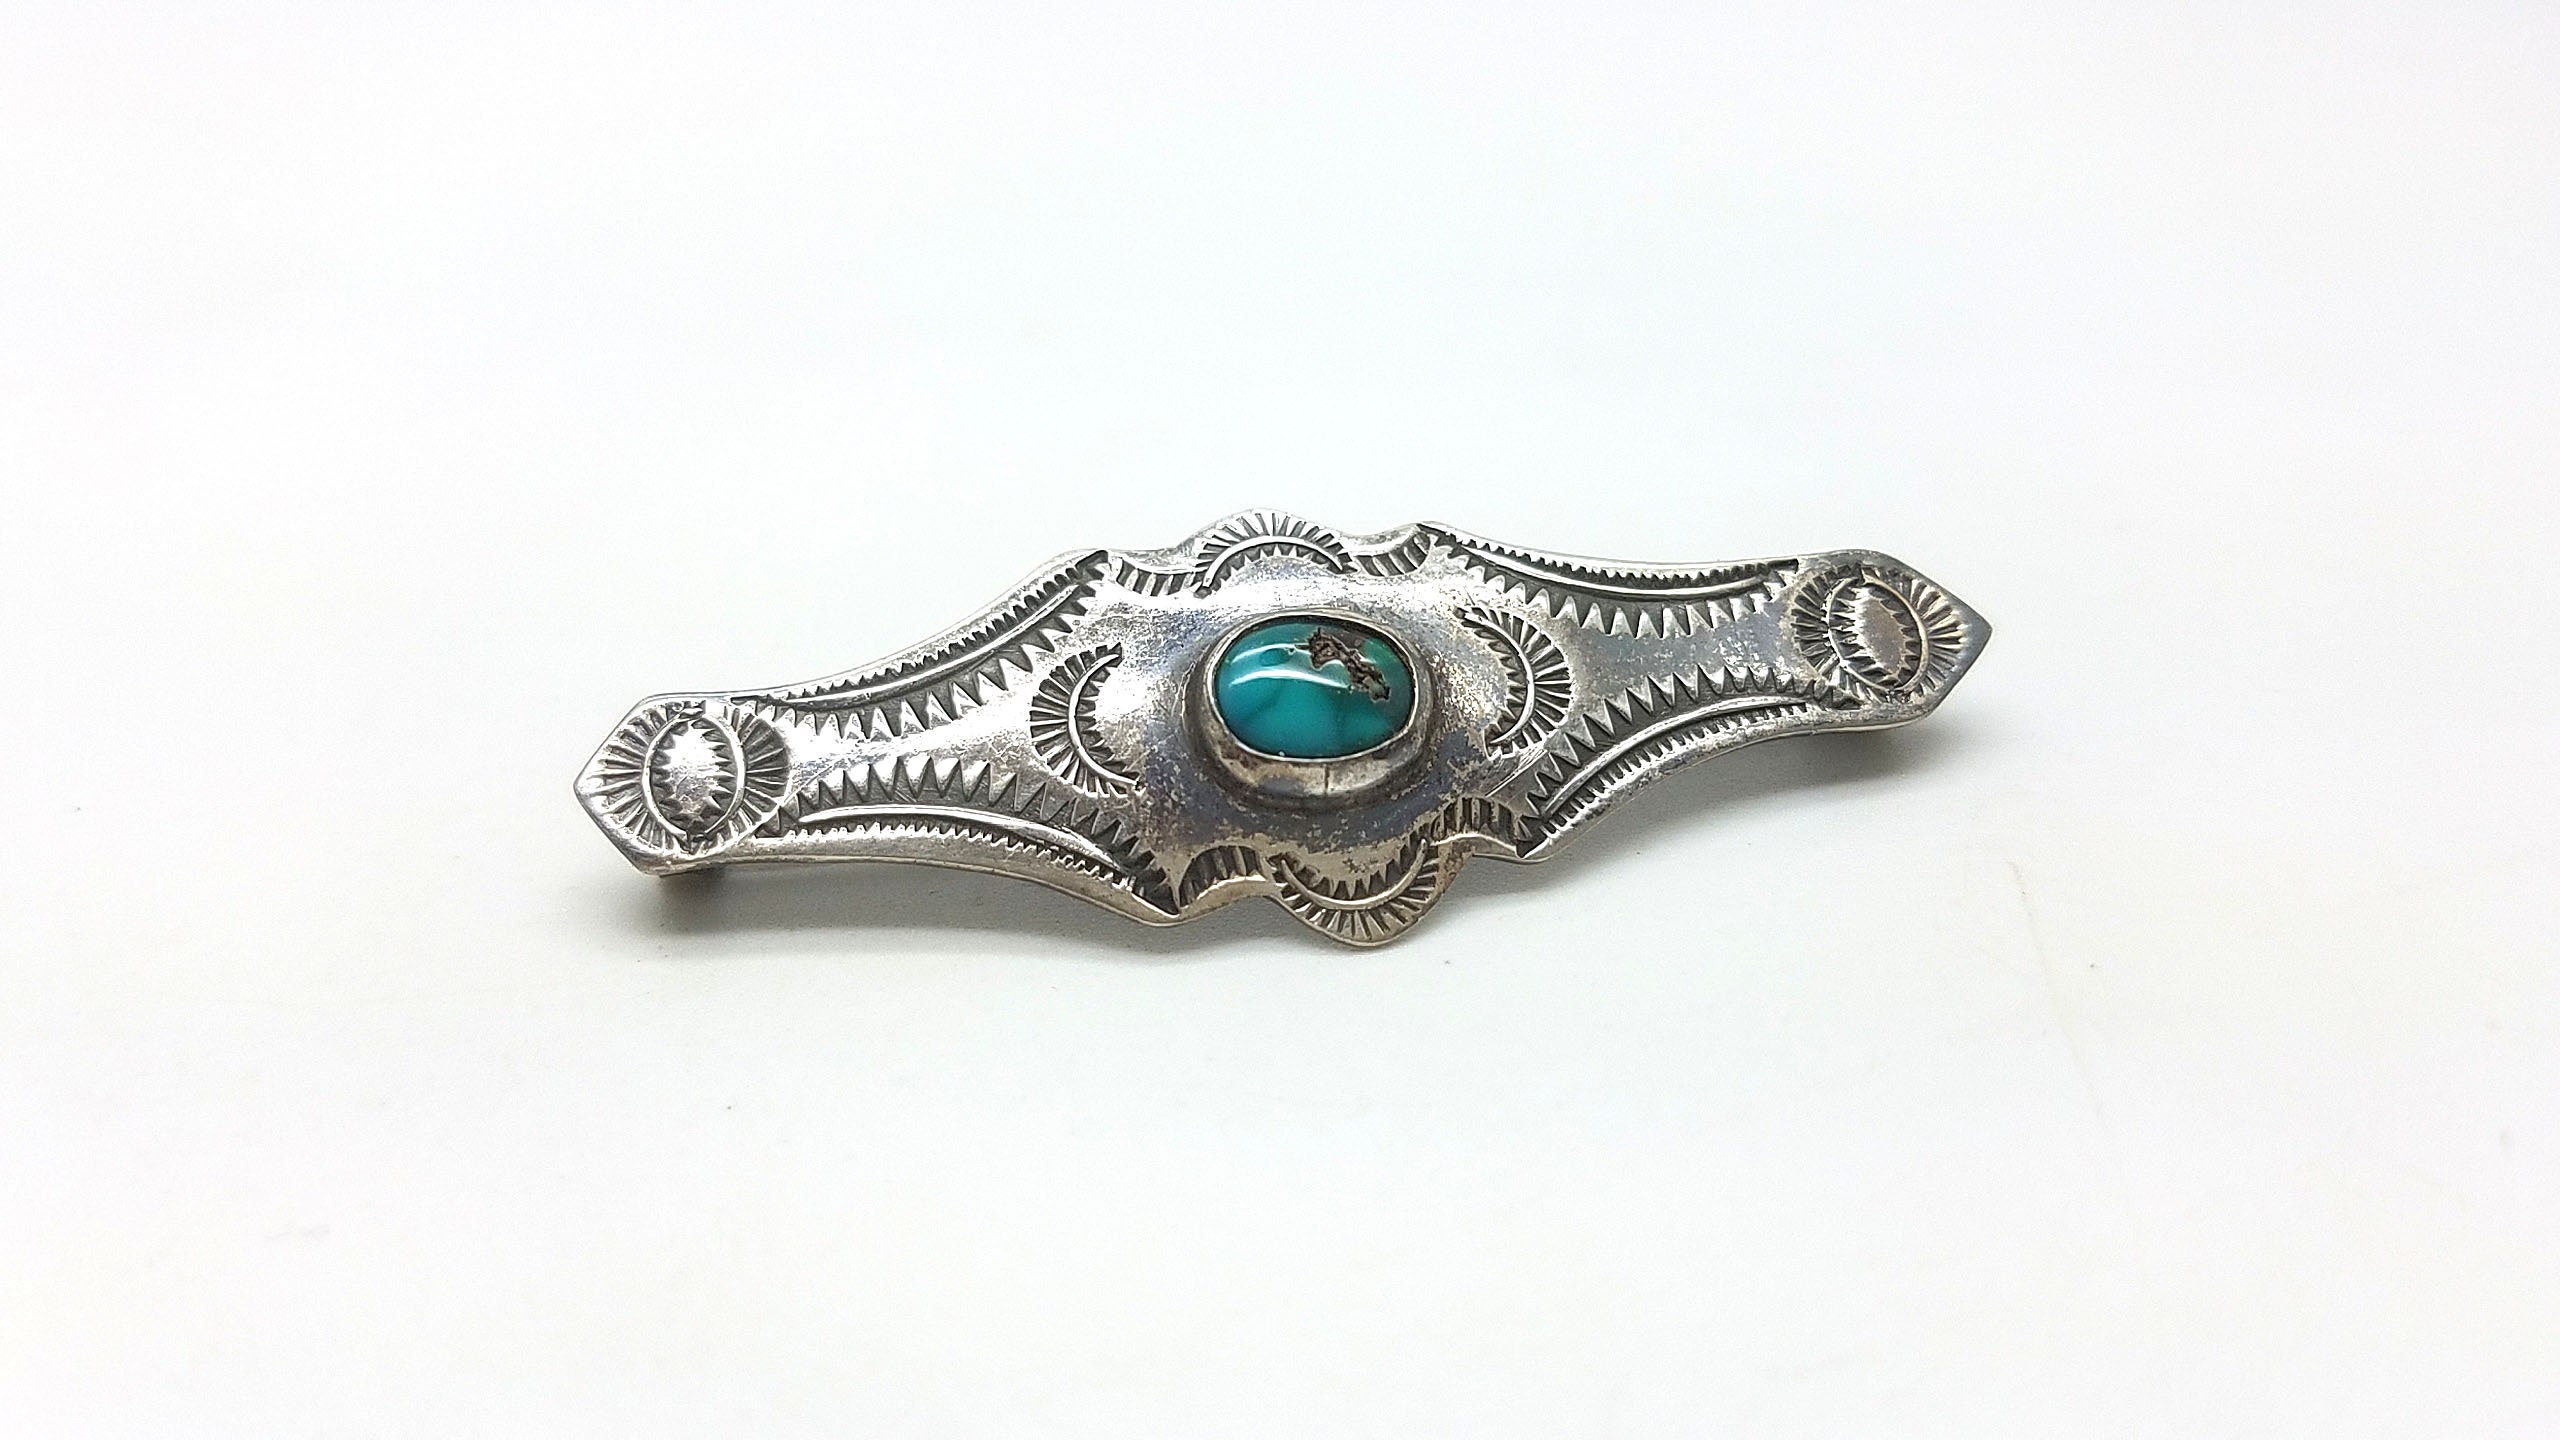 Vintage Silver and Turquoise Brooch - Southwestern Style - Native ...